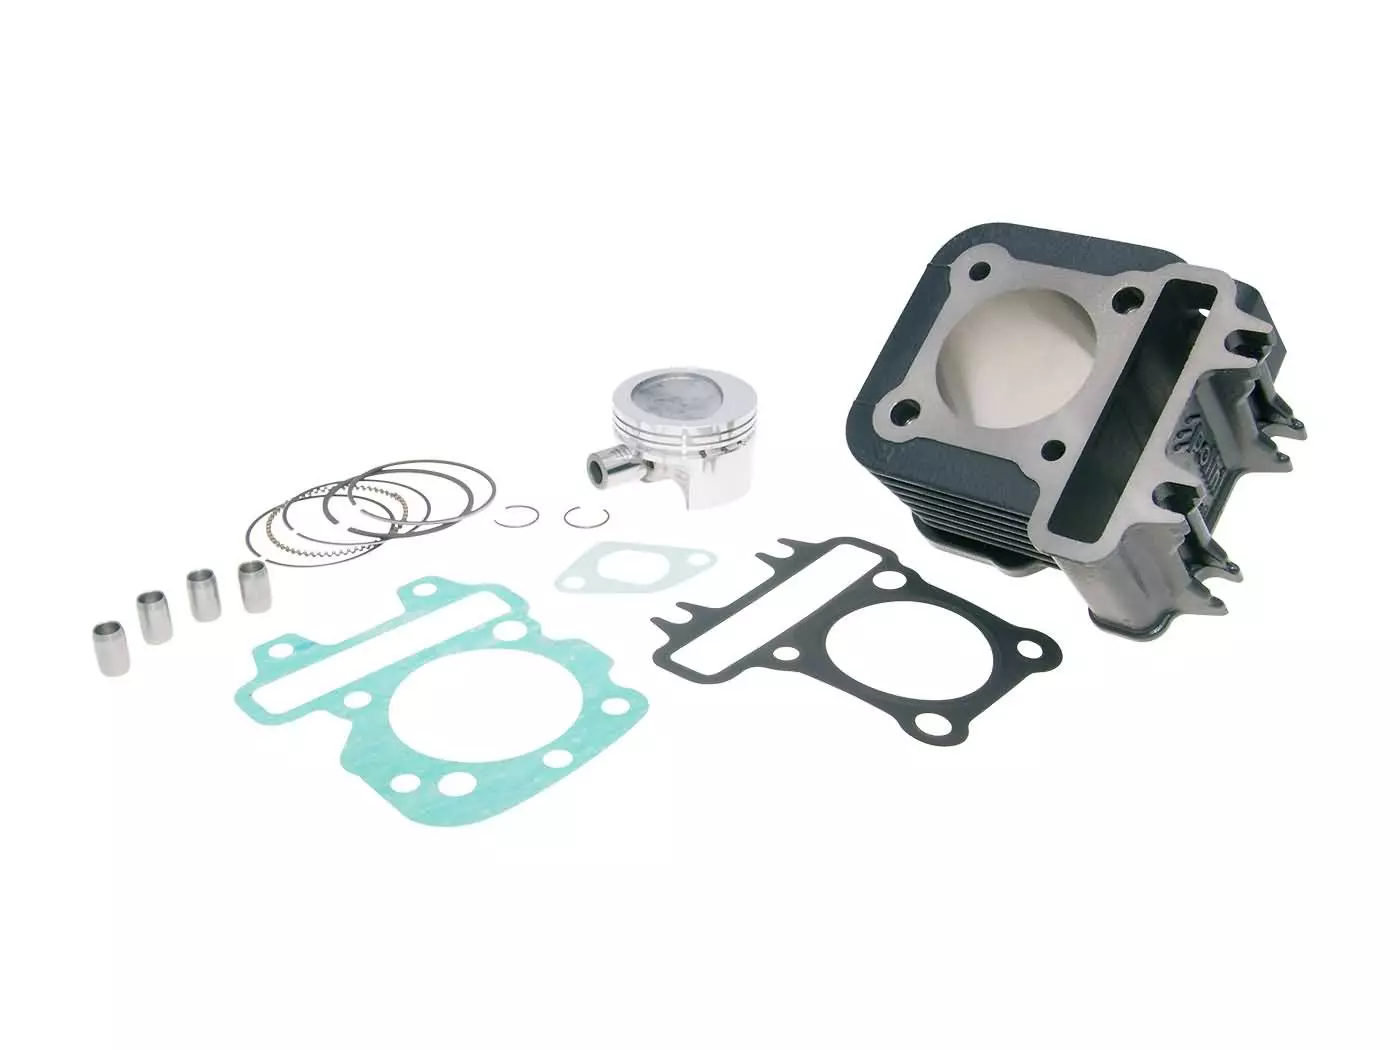 Cylinder Kit Polini Cast Iron Sport 79cc 49mm For Piaggio 50 4T 2V